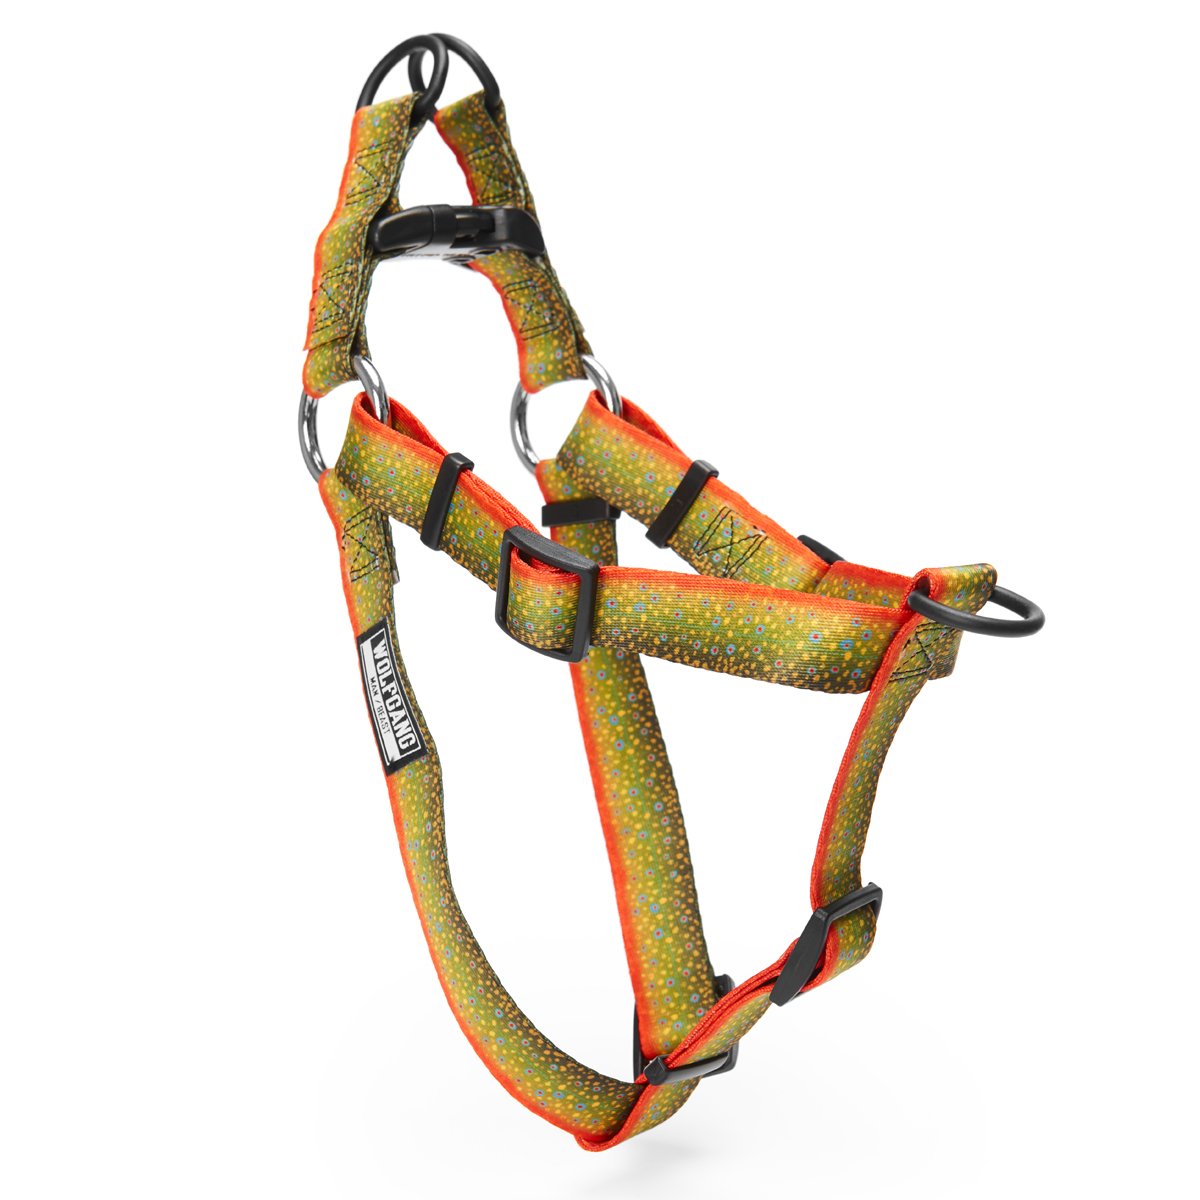 BrookTrout COMFORT DOG HARNESS Made in the USA by Wolfgang Man & Beast